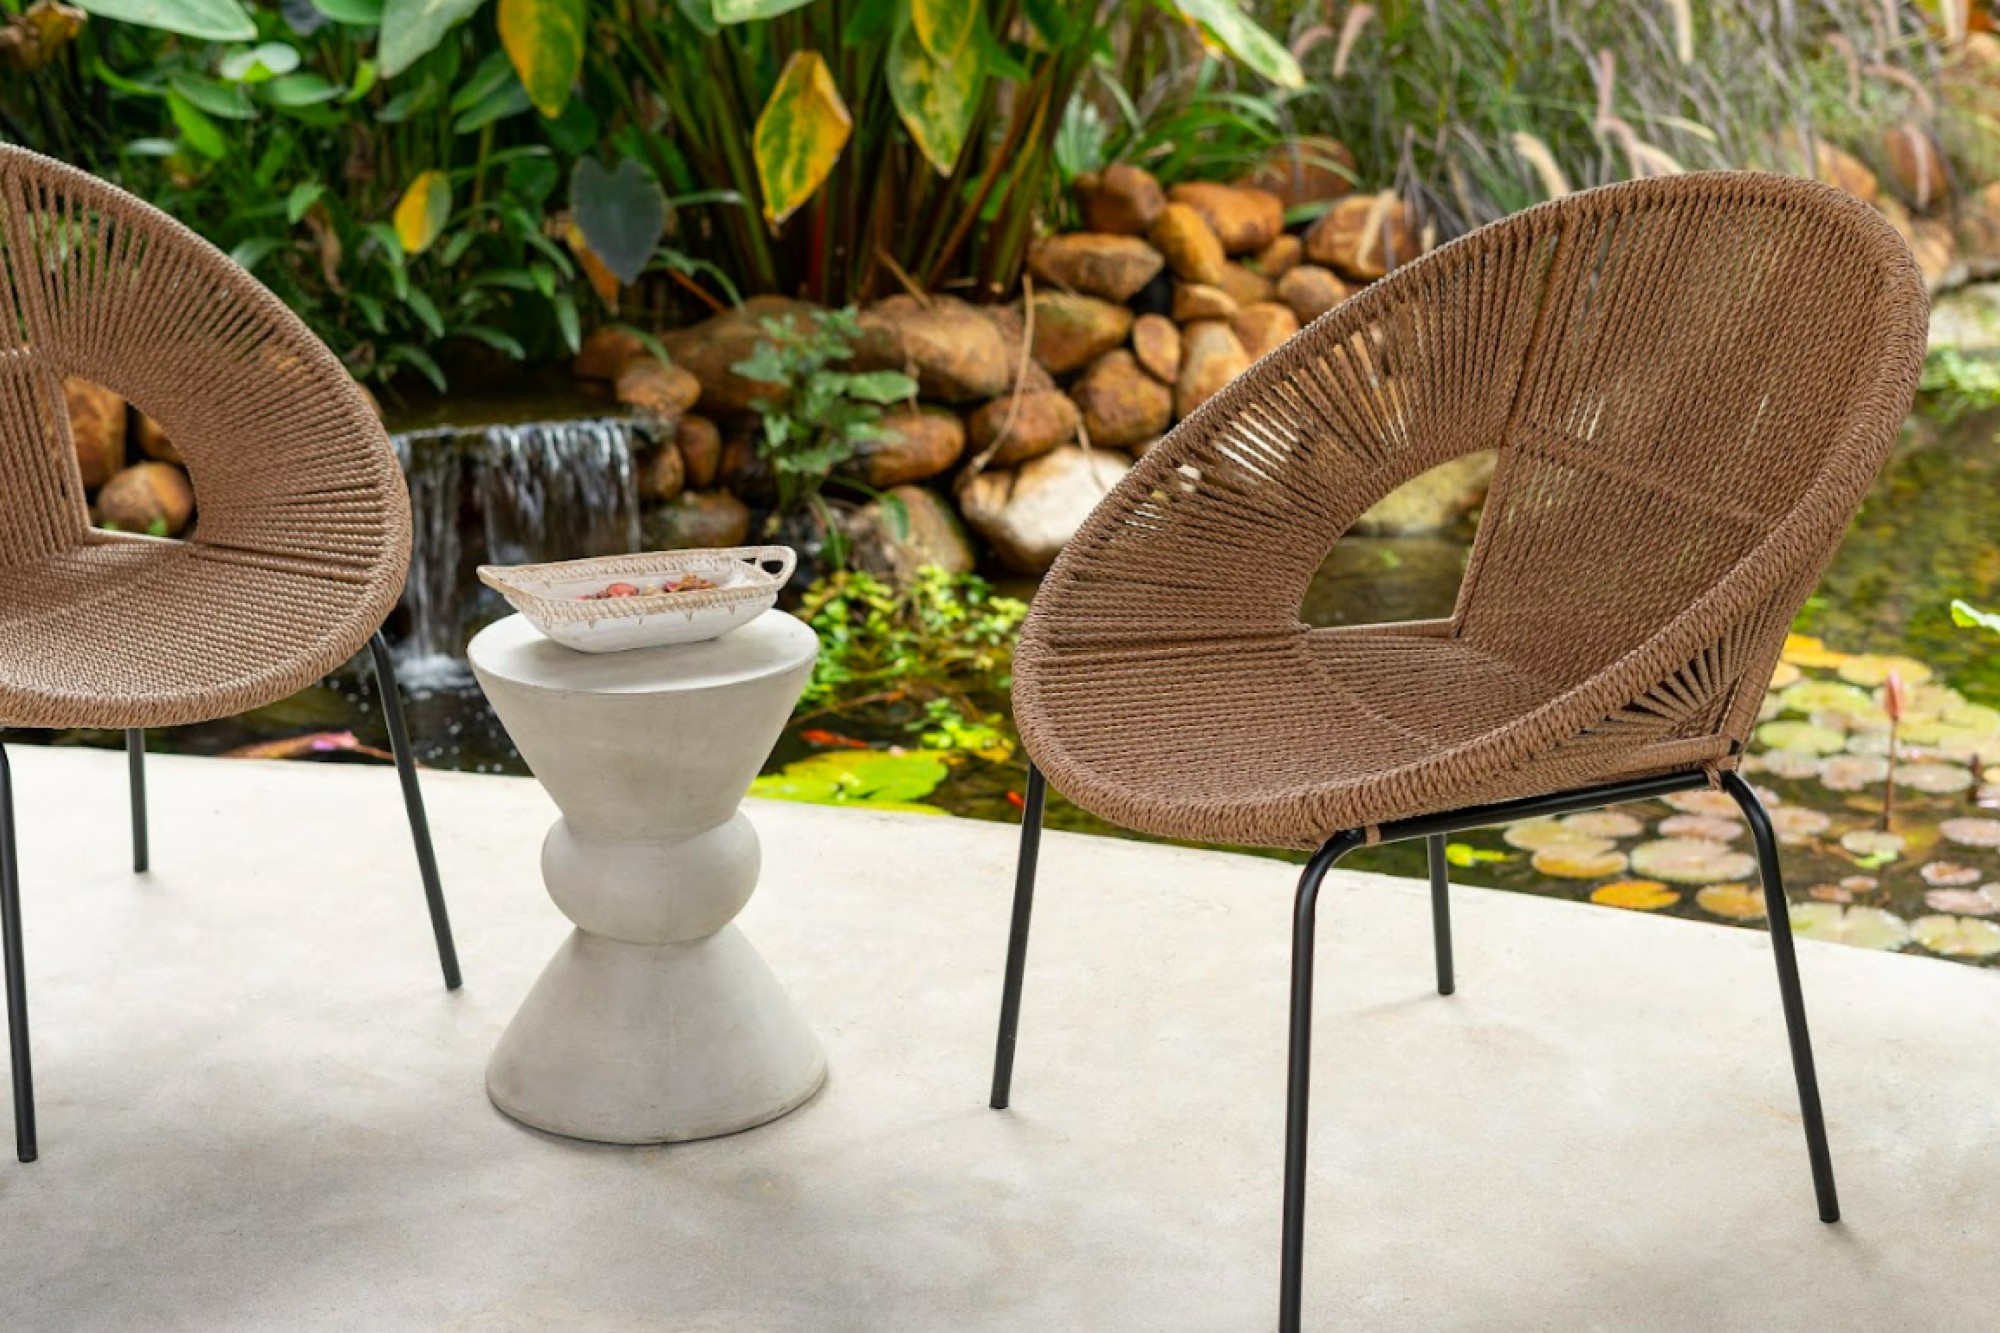 Outdoor Connections exquisite wicker furniture collection